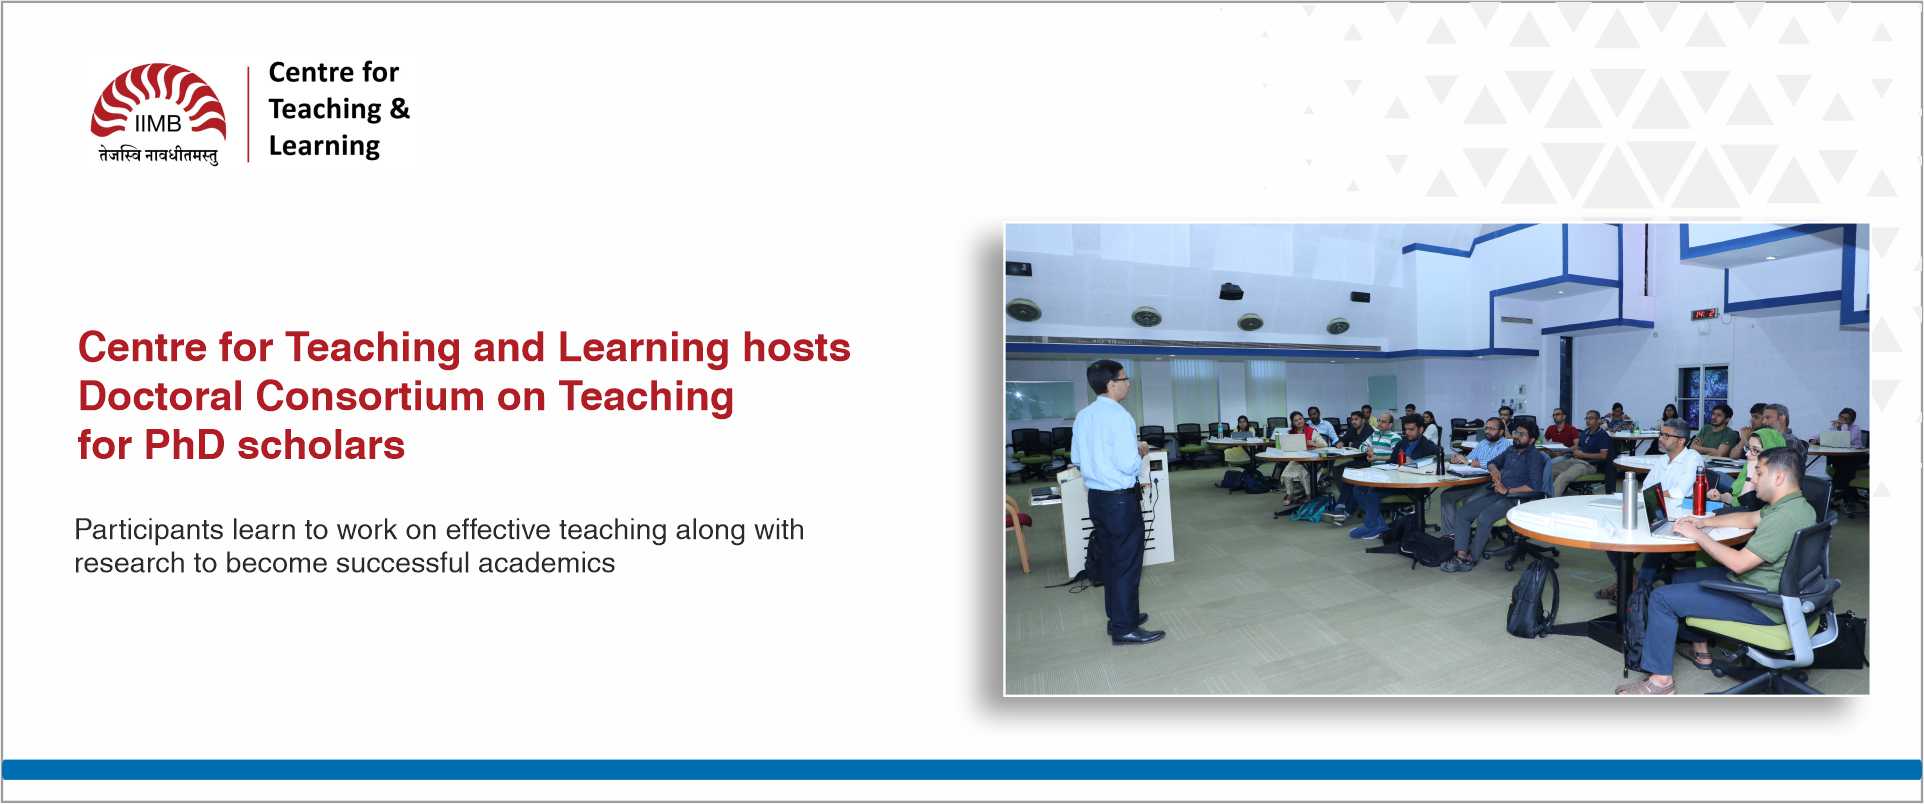 Centre for Teaching and Learning hosts Doctoral Consortium on Teaching for PhD scholars